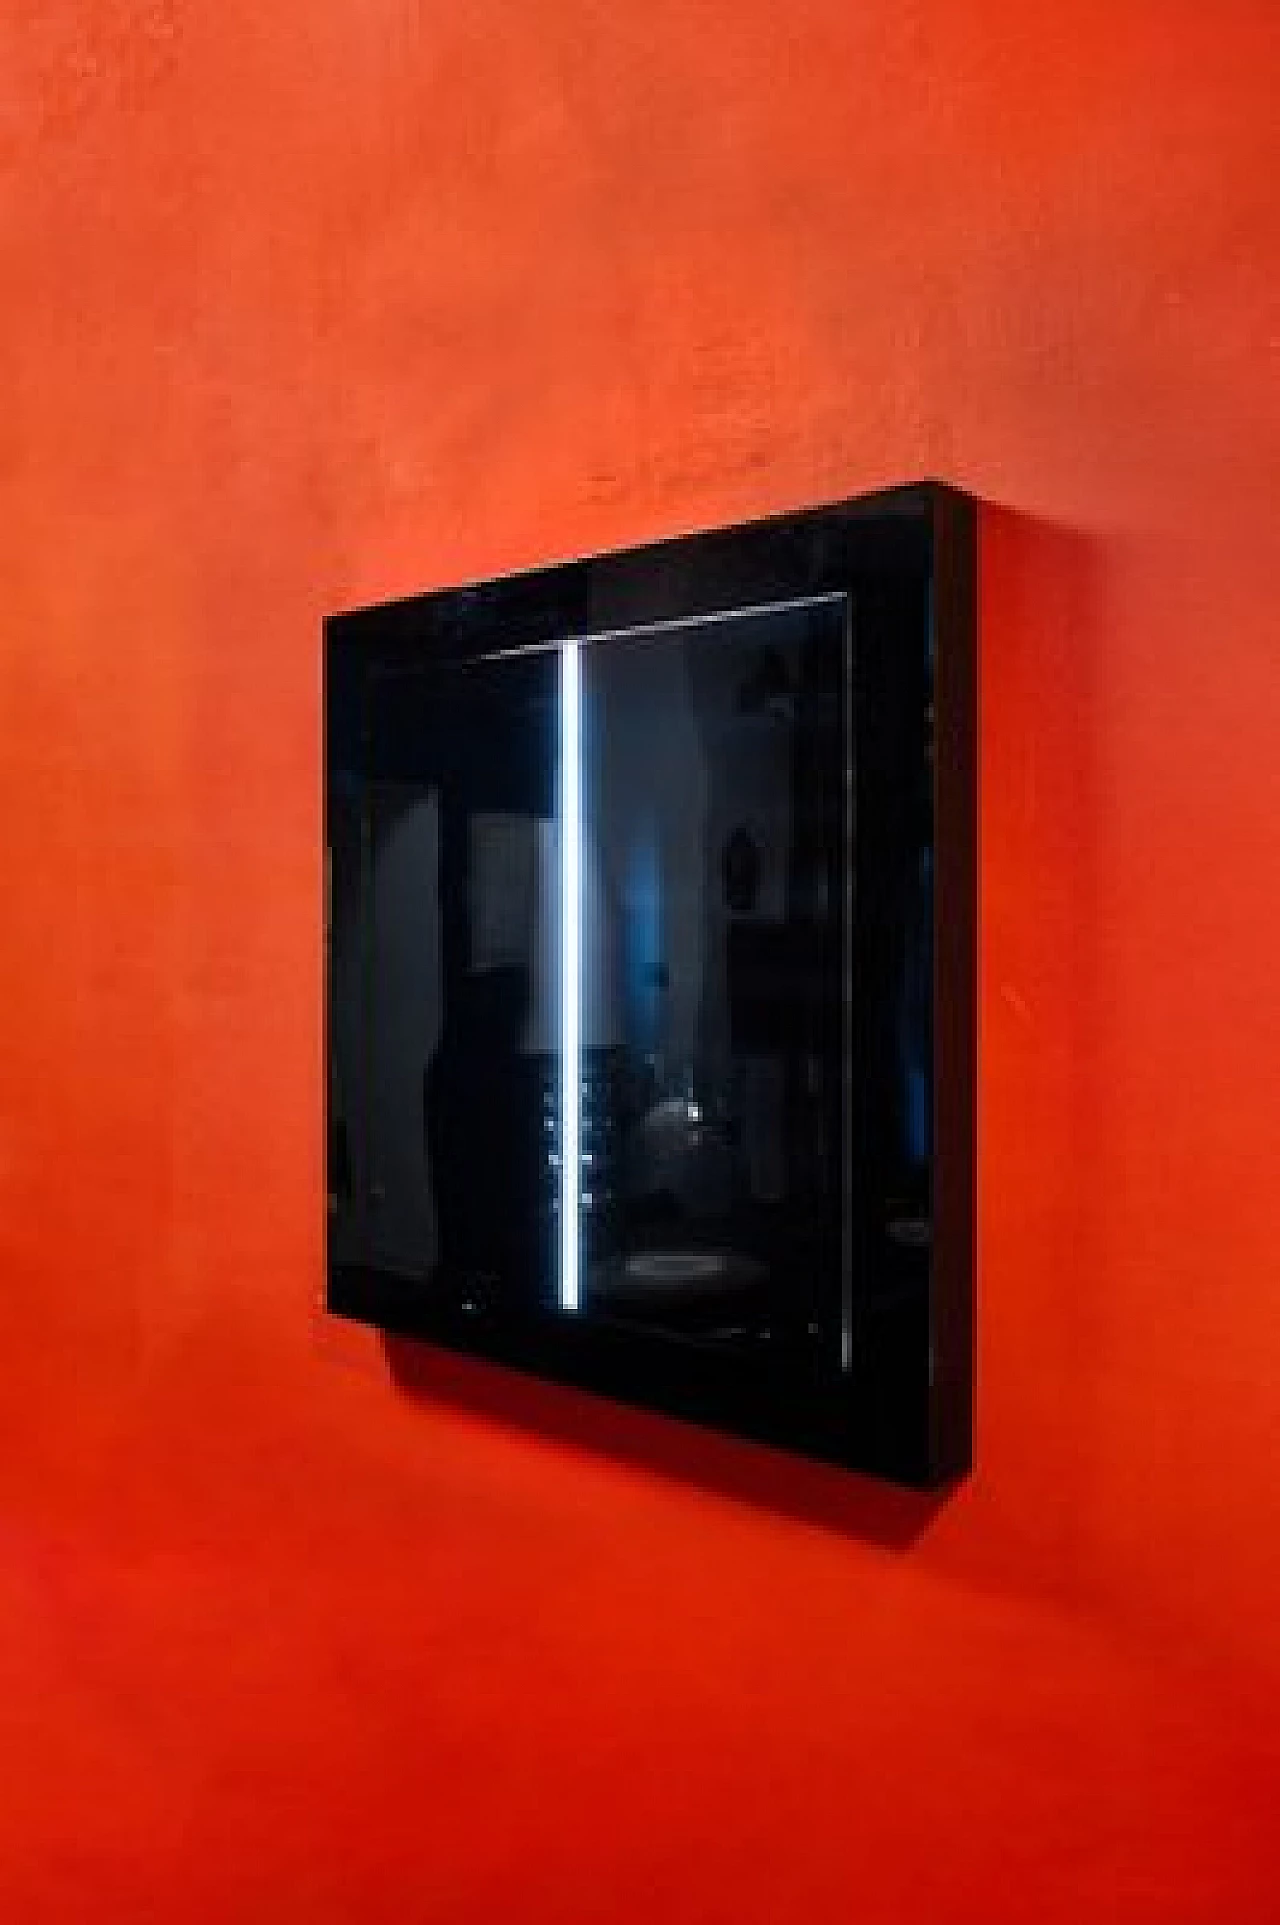 Beppe Sesia, Light on Black Wall, steel and methacrylate light sculpture, 1971 3